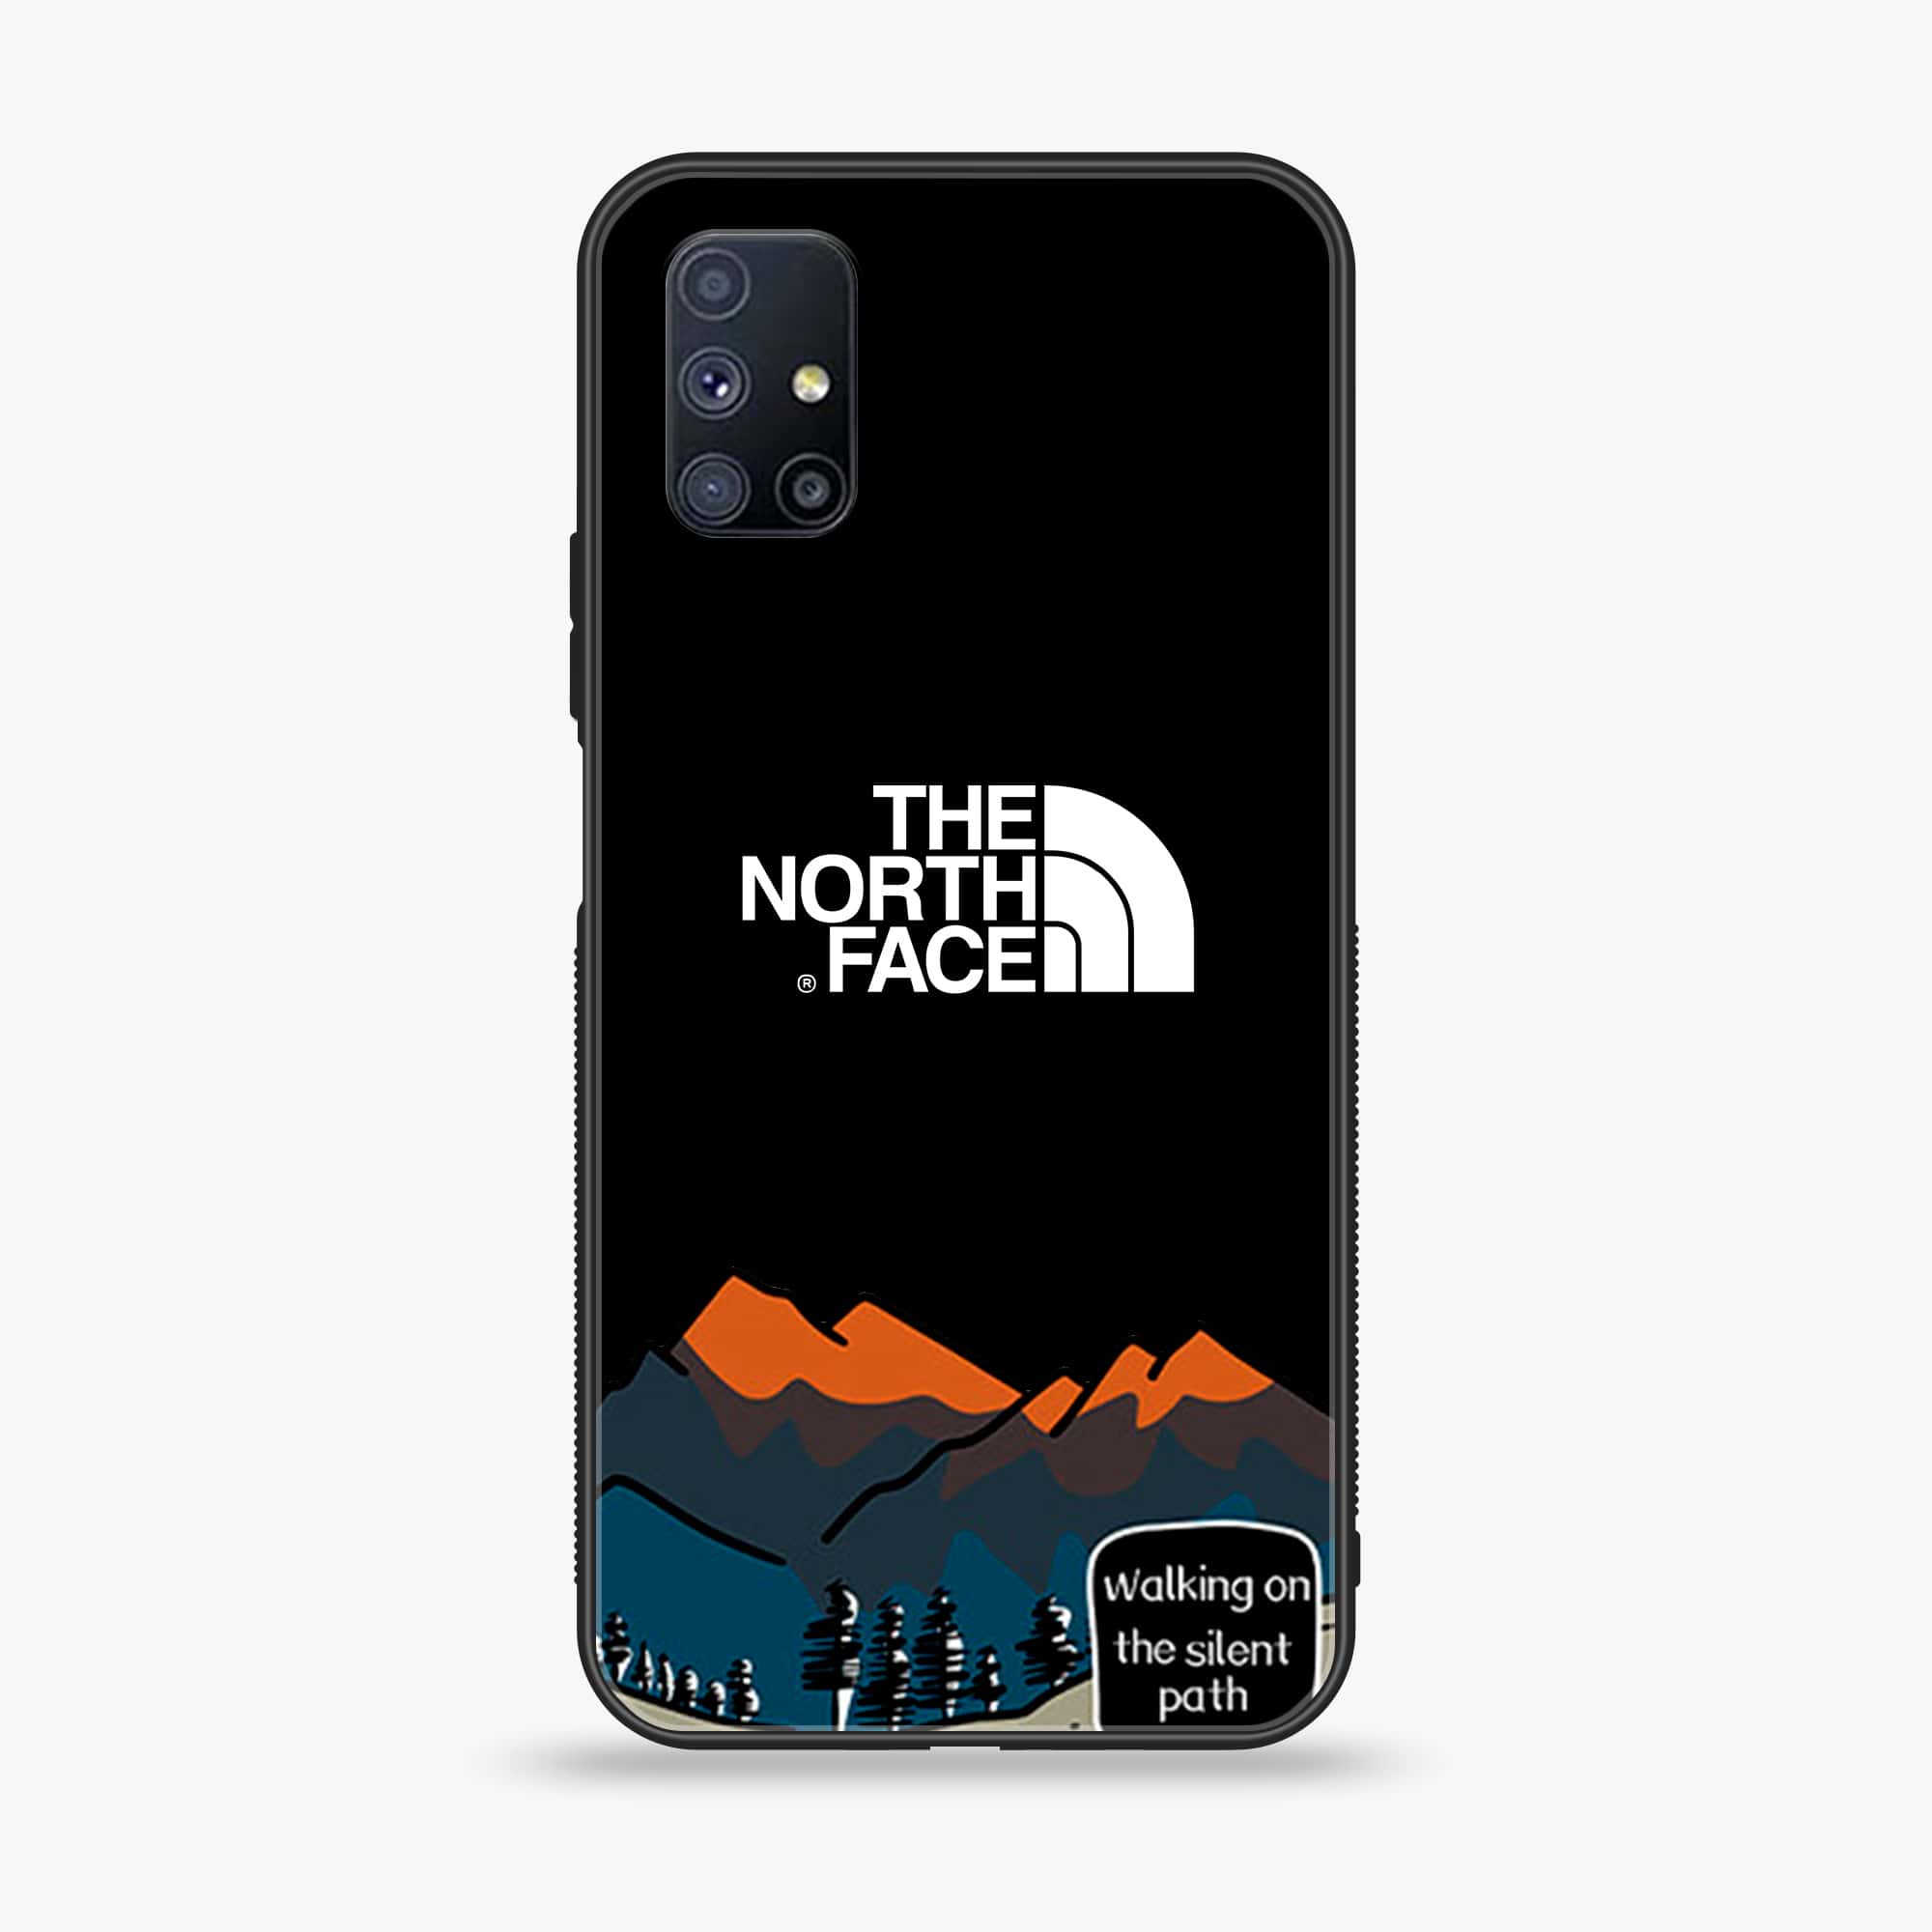 Samsung Galaxy M51 - The North Face Series - Premium Printed Glass soft Bumper shock Proof Case